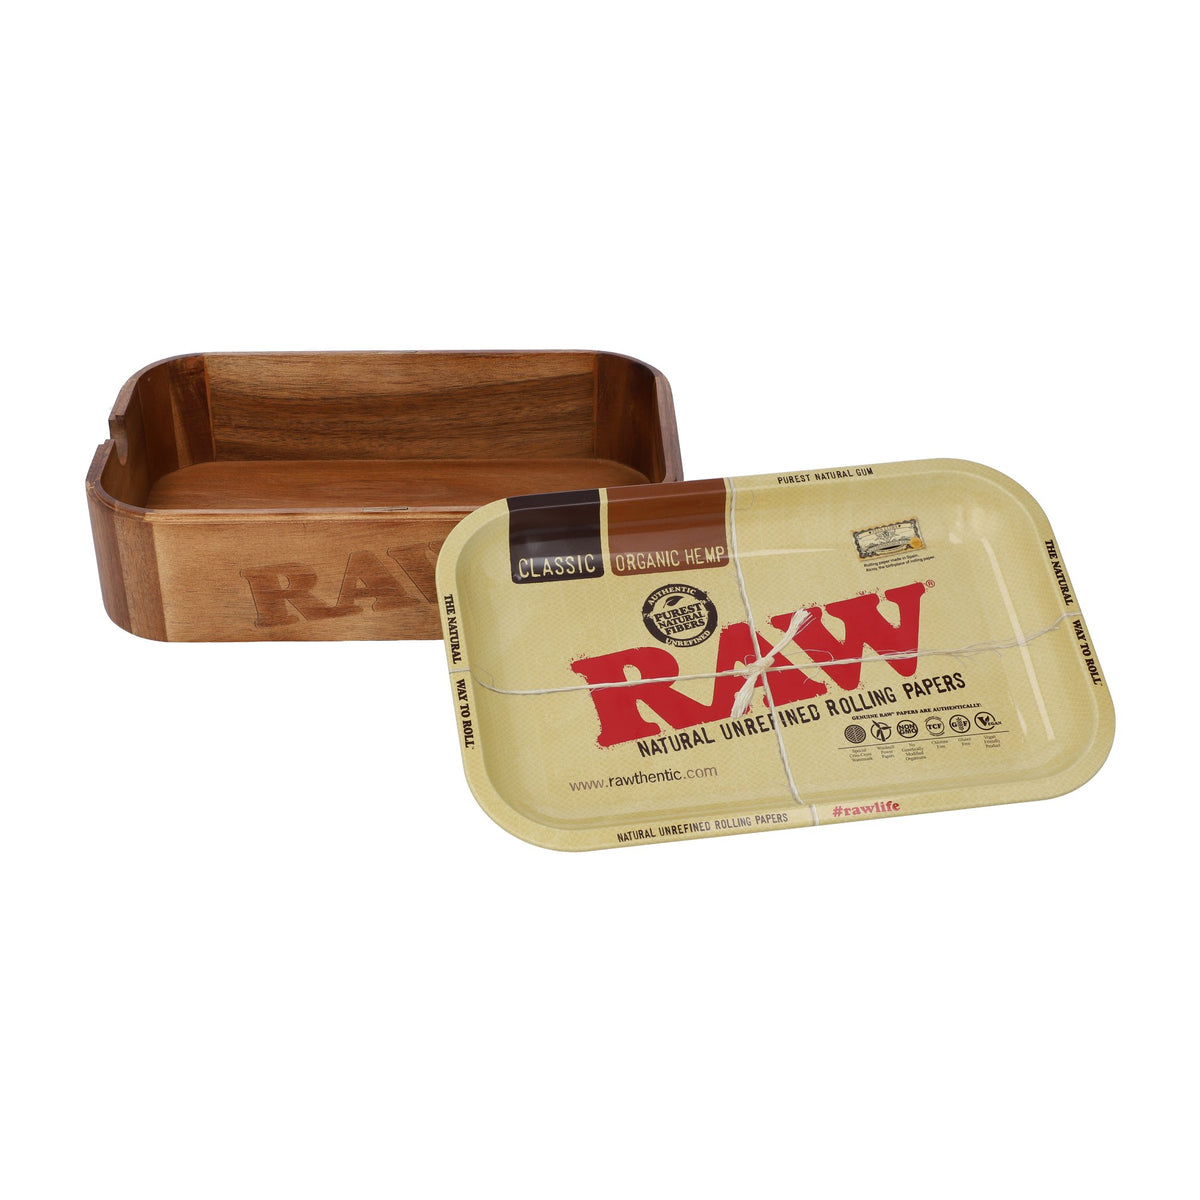 RAW Cache Box Storage esd-official